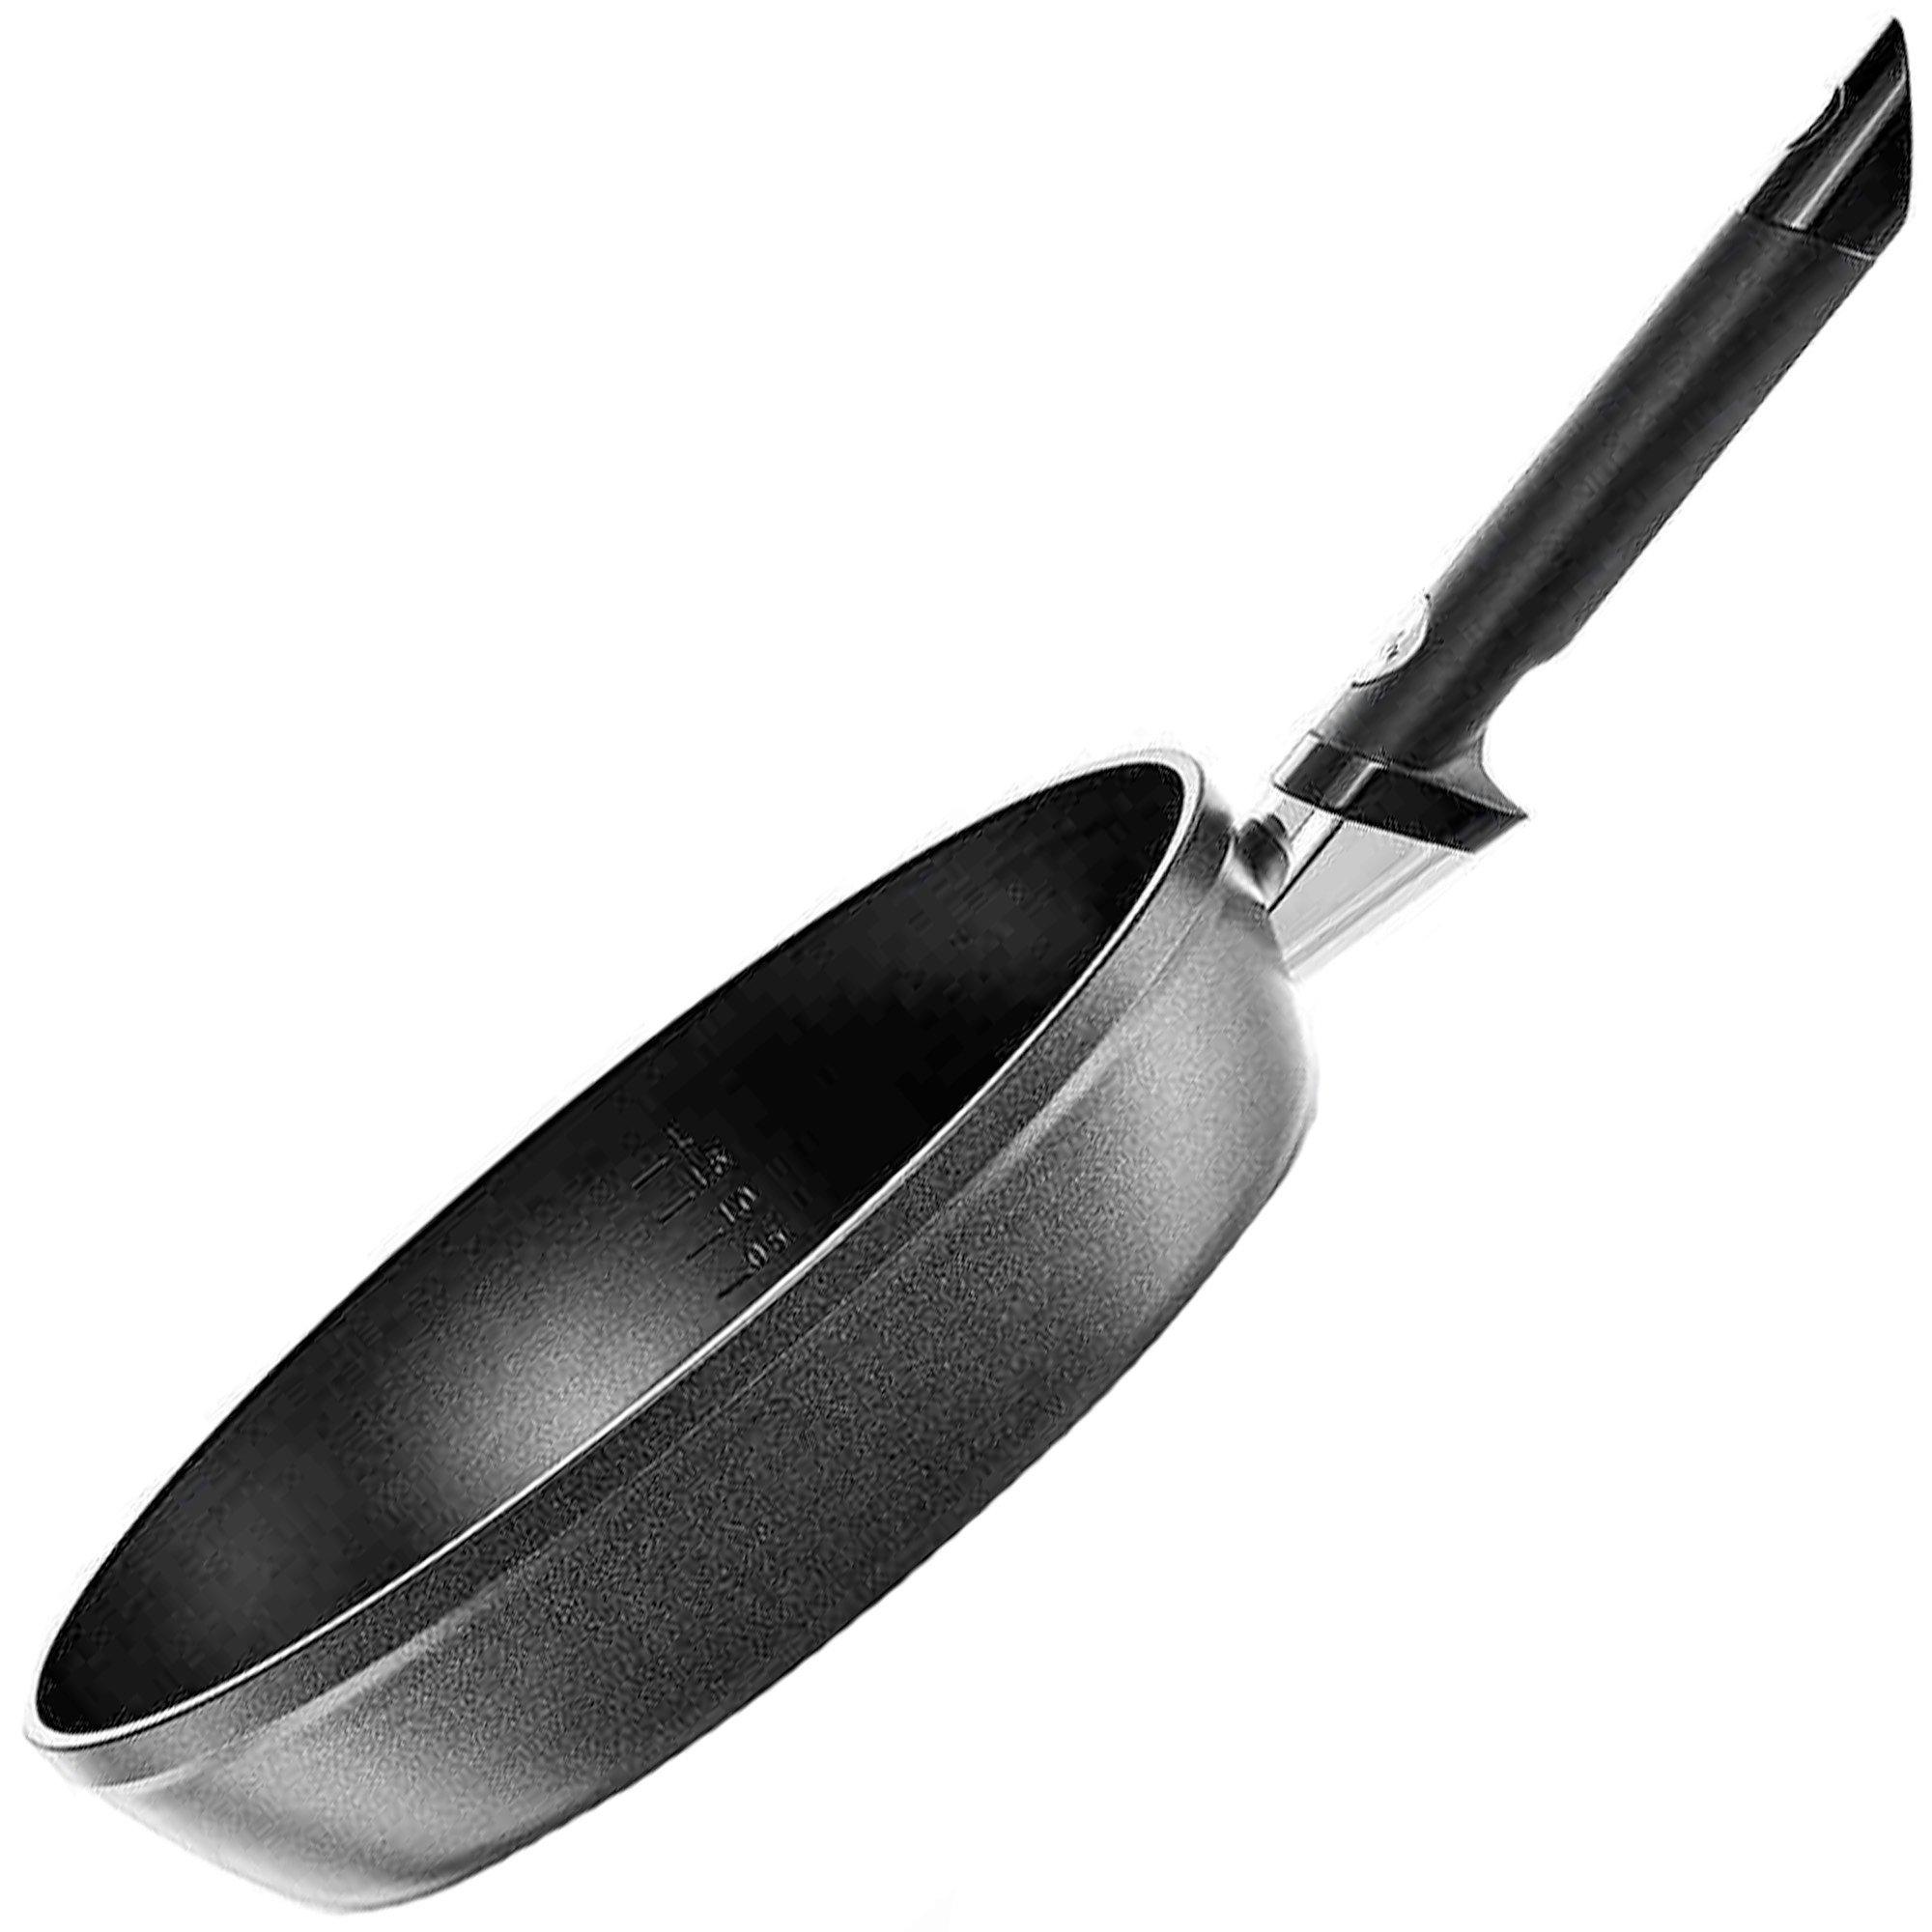 Fissler Levital Classic 157-121-28-100-0 frying pan 28cm | Advantageously  shopping at